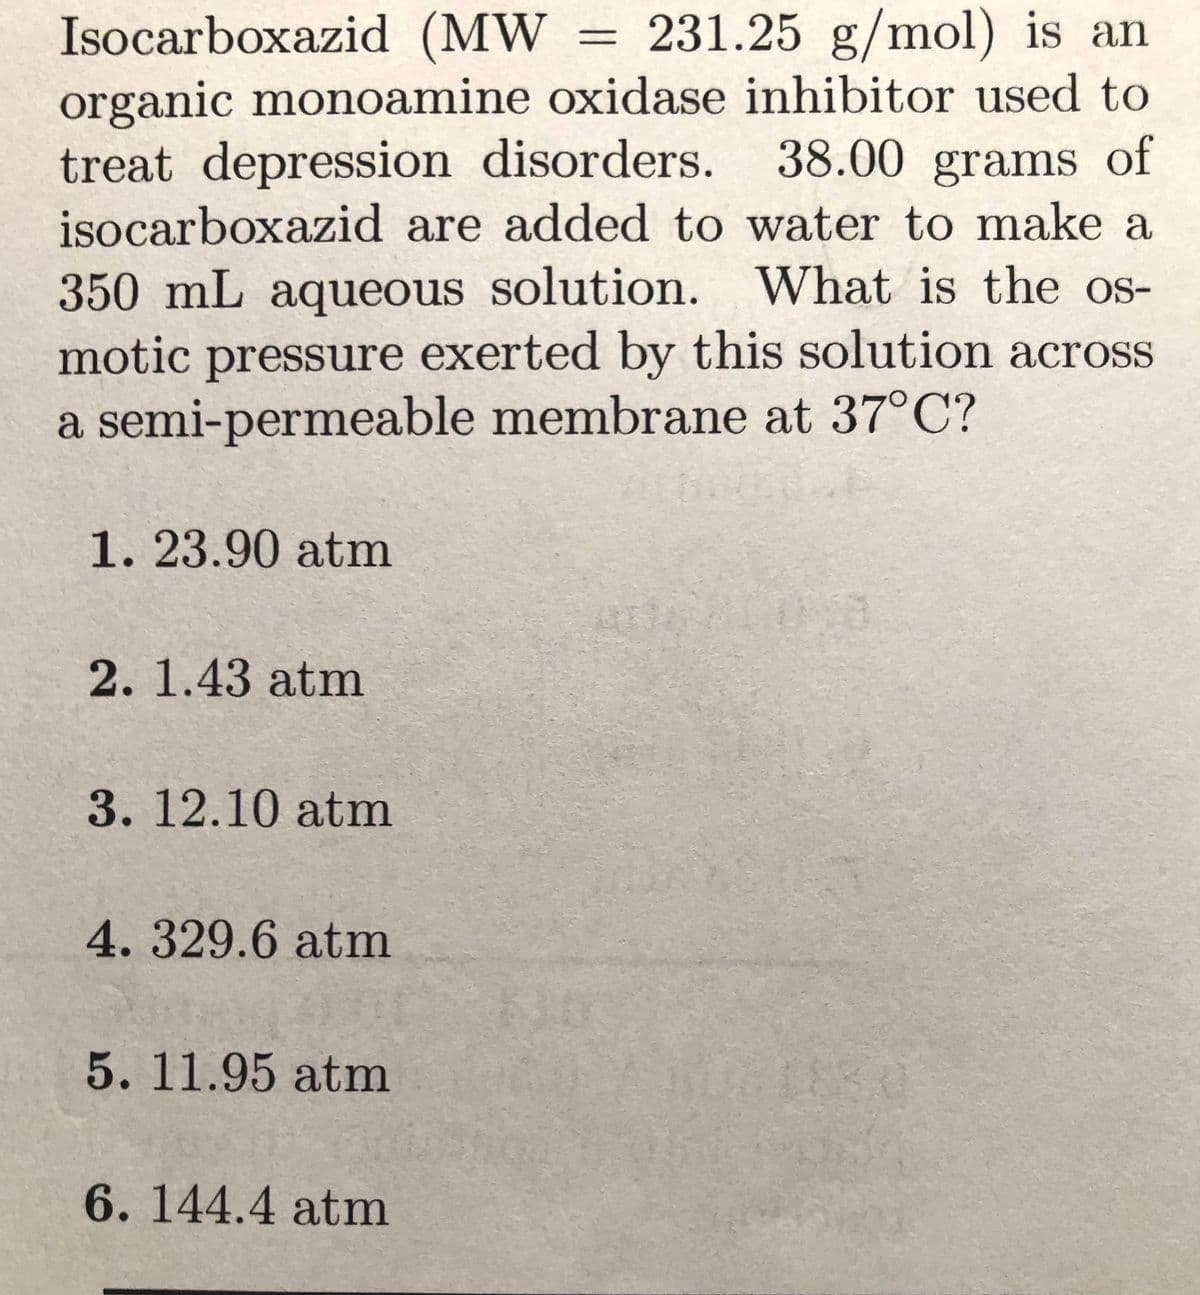 Isocarboxazid (MW = 231.25 g/mol) is an
%3D
organic monoamine oxidase inhibitor used to
treat depression disorders.
isocarboxazid are added to water to make a
38.00grams of
350mL aqueous solution. What is the os-
motic pressure exerted by this solution across
a semi-permeable membrane at 37°C?
1. 23.90 atm
2.1.43 atm
3. 12.10 atm
4.329.6atm
5.11.95 atm
6.144.4 atm
